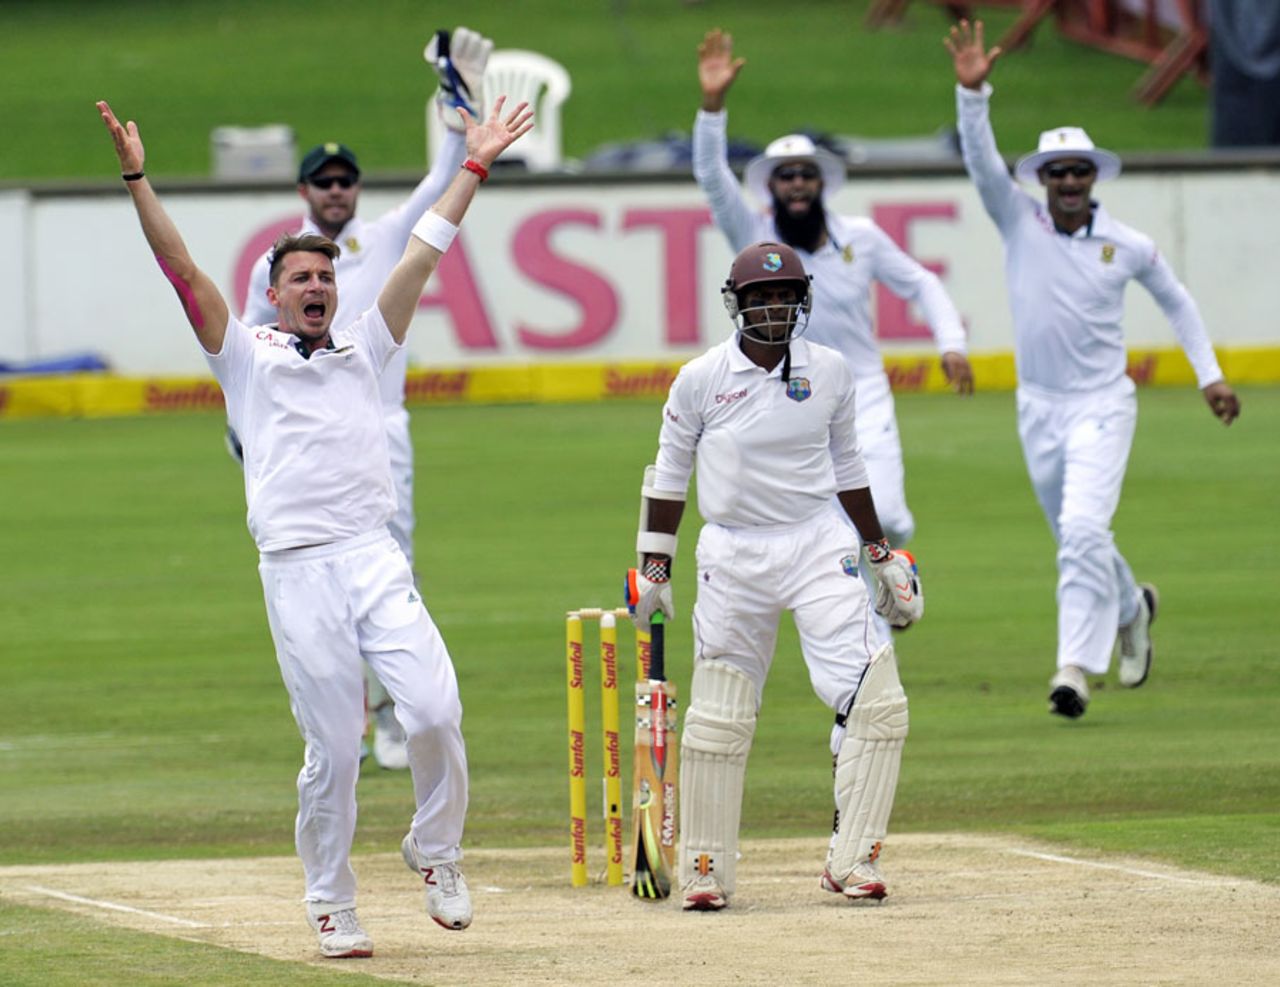 Dale Steyn celebrates after getting Shivnarine Chanderpaul out caught behind, South Africa v West Indies, 1st Test, Centurion, 4th day, December 20, 2014